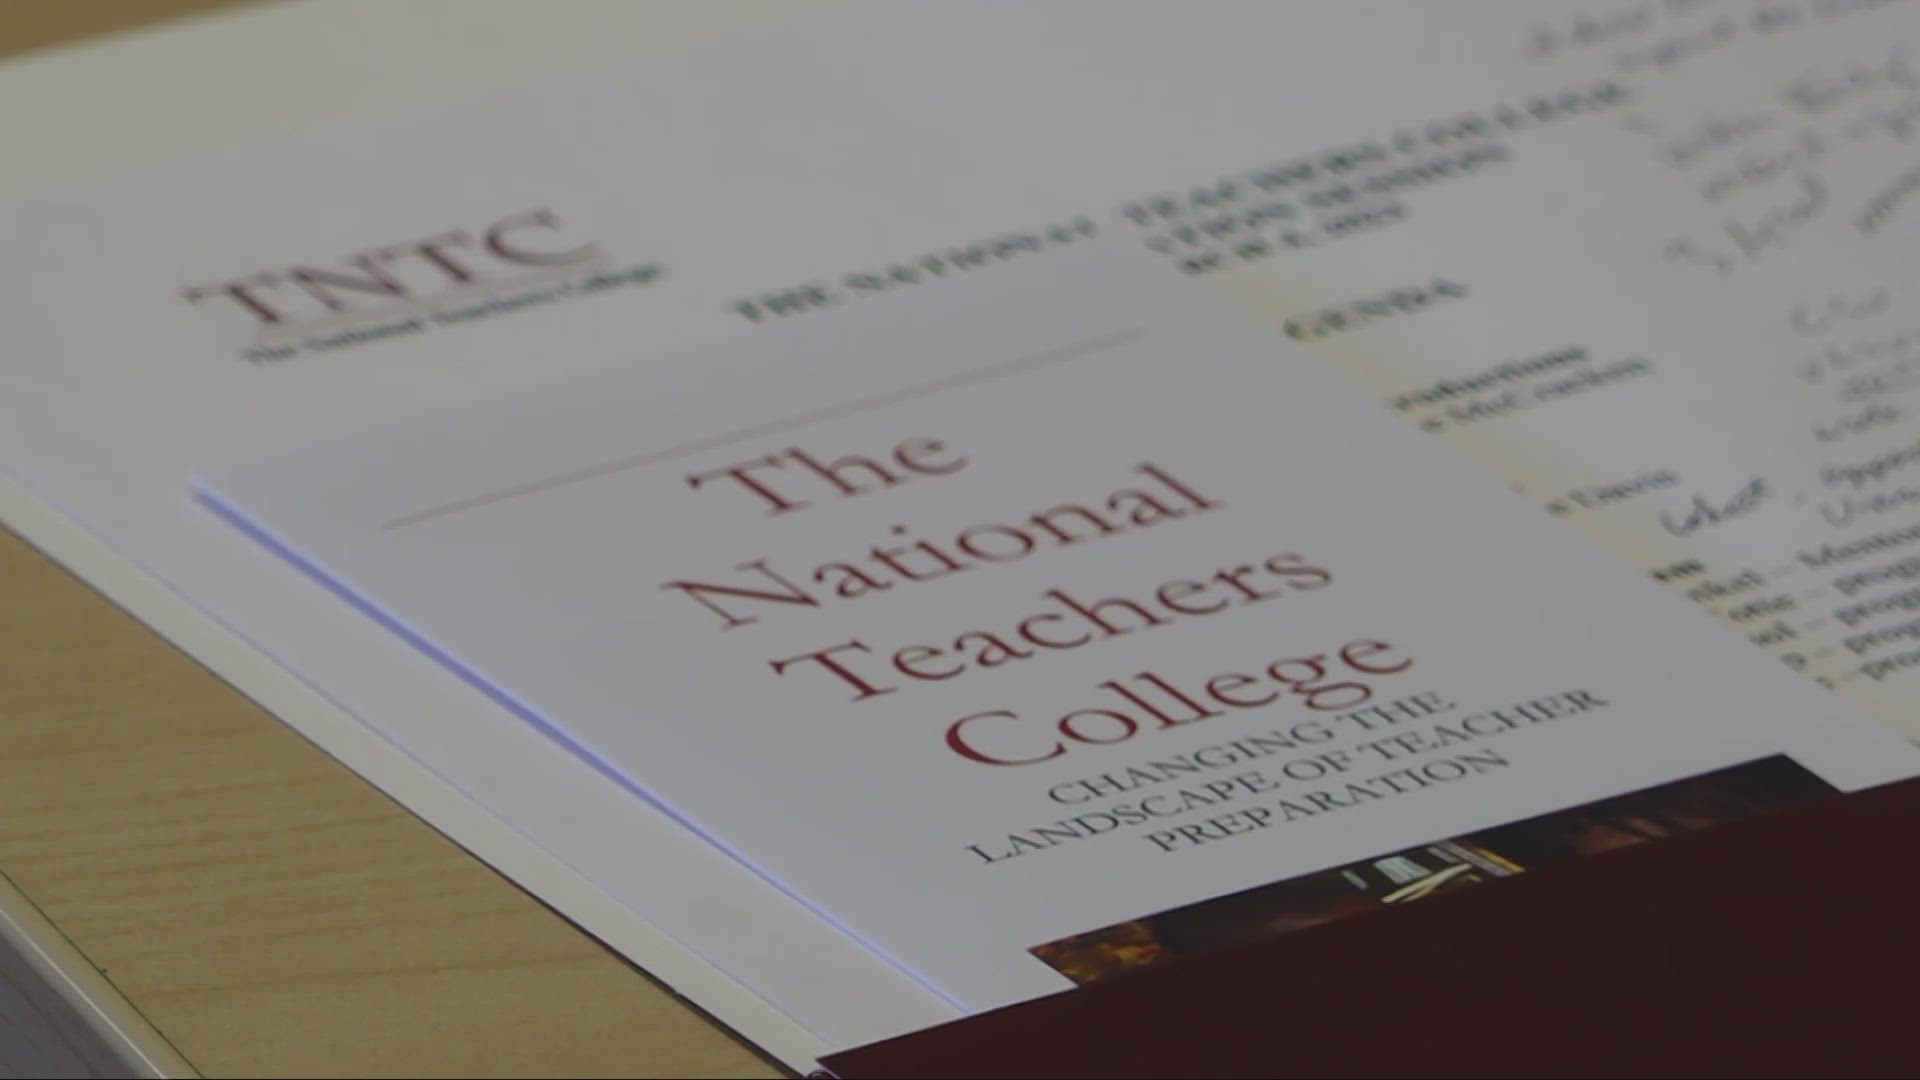 The National Teachers College is helping individuals start their career change while aiding the teacher shortage the country has been mired in for the past few years